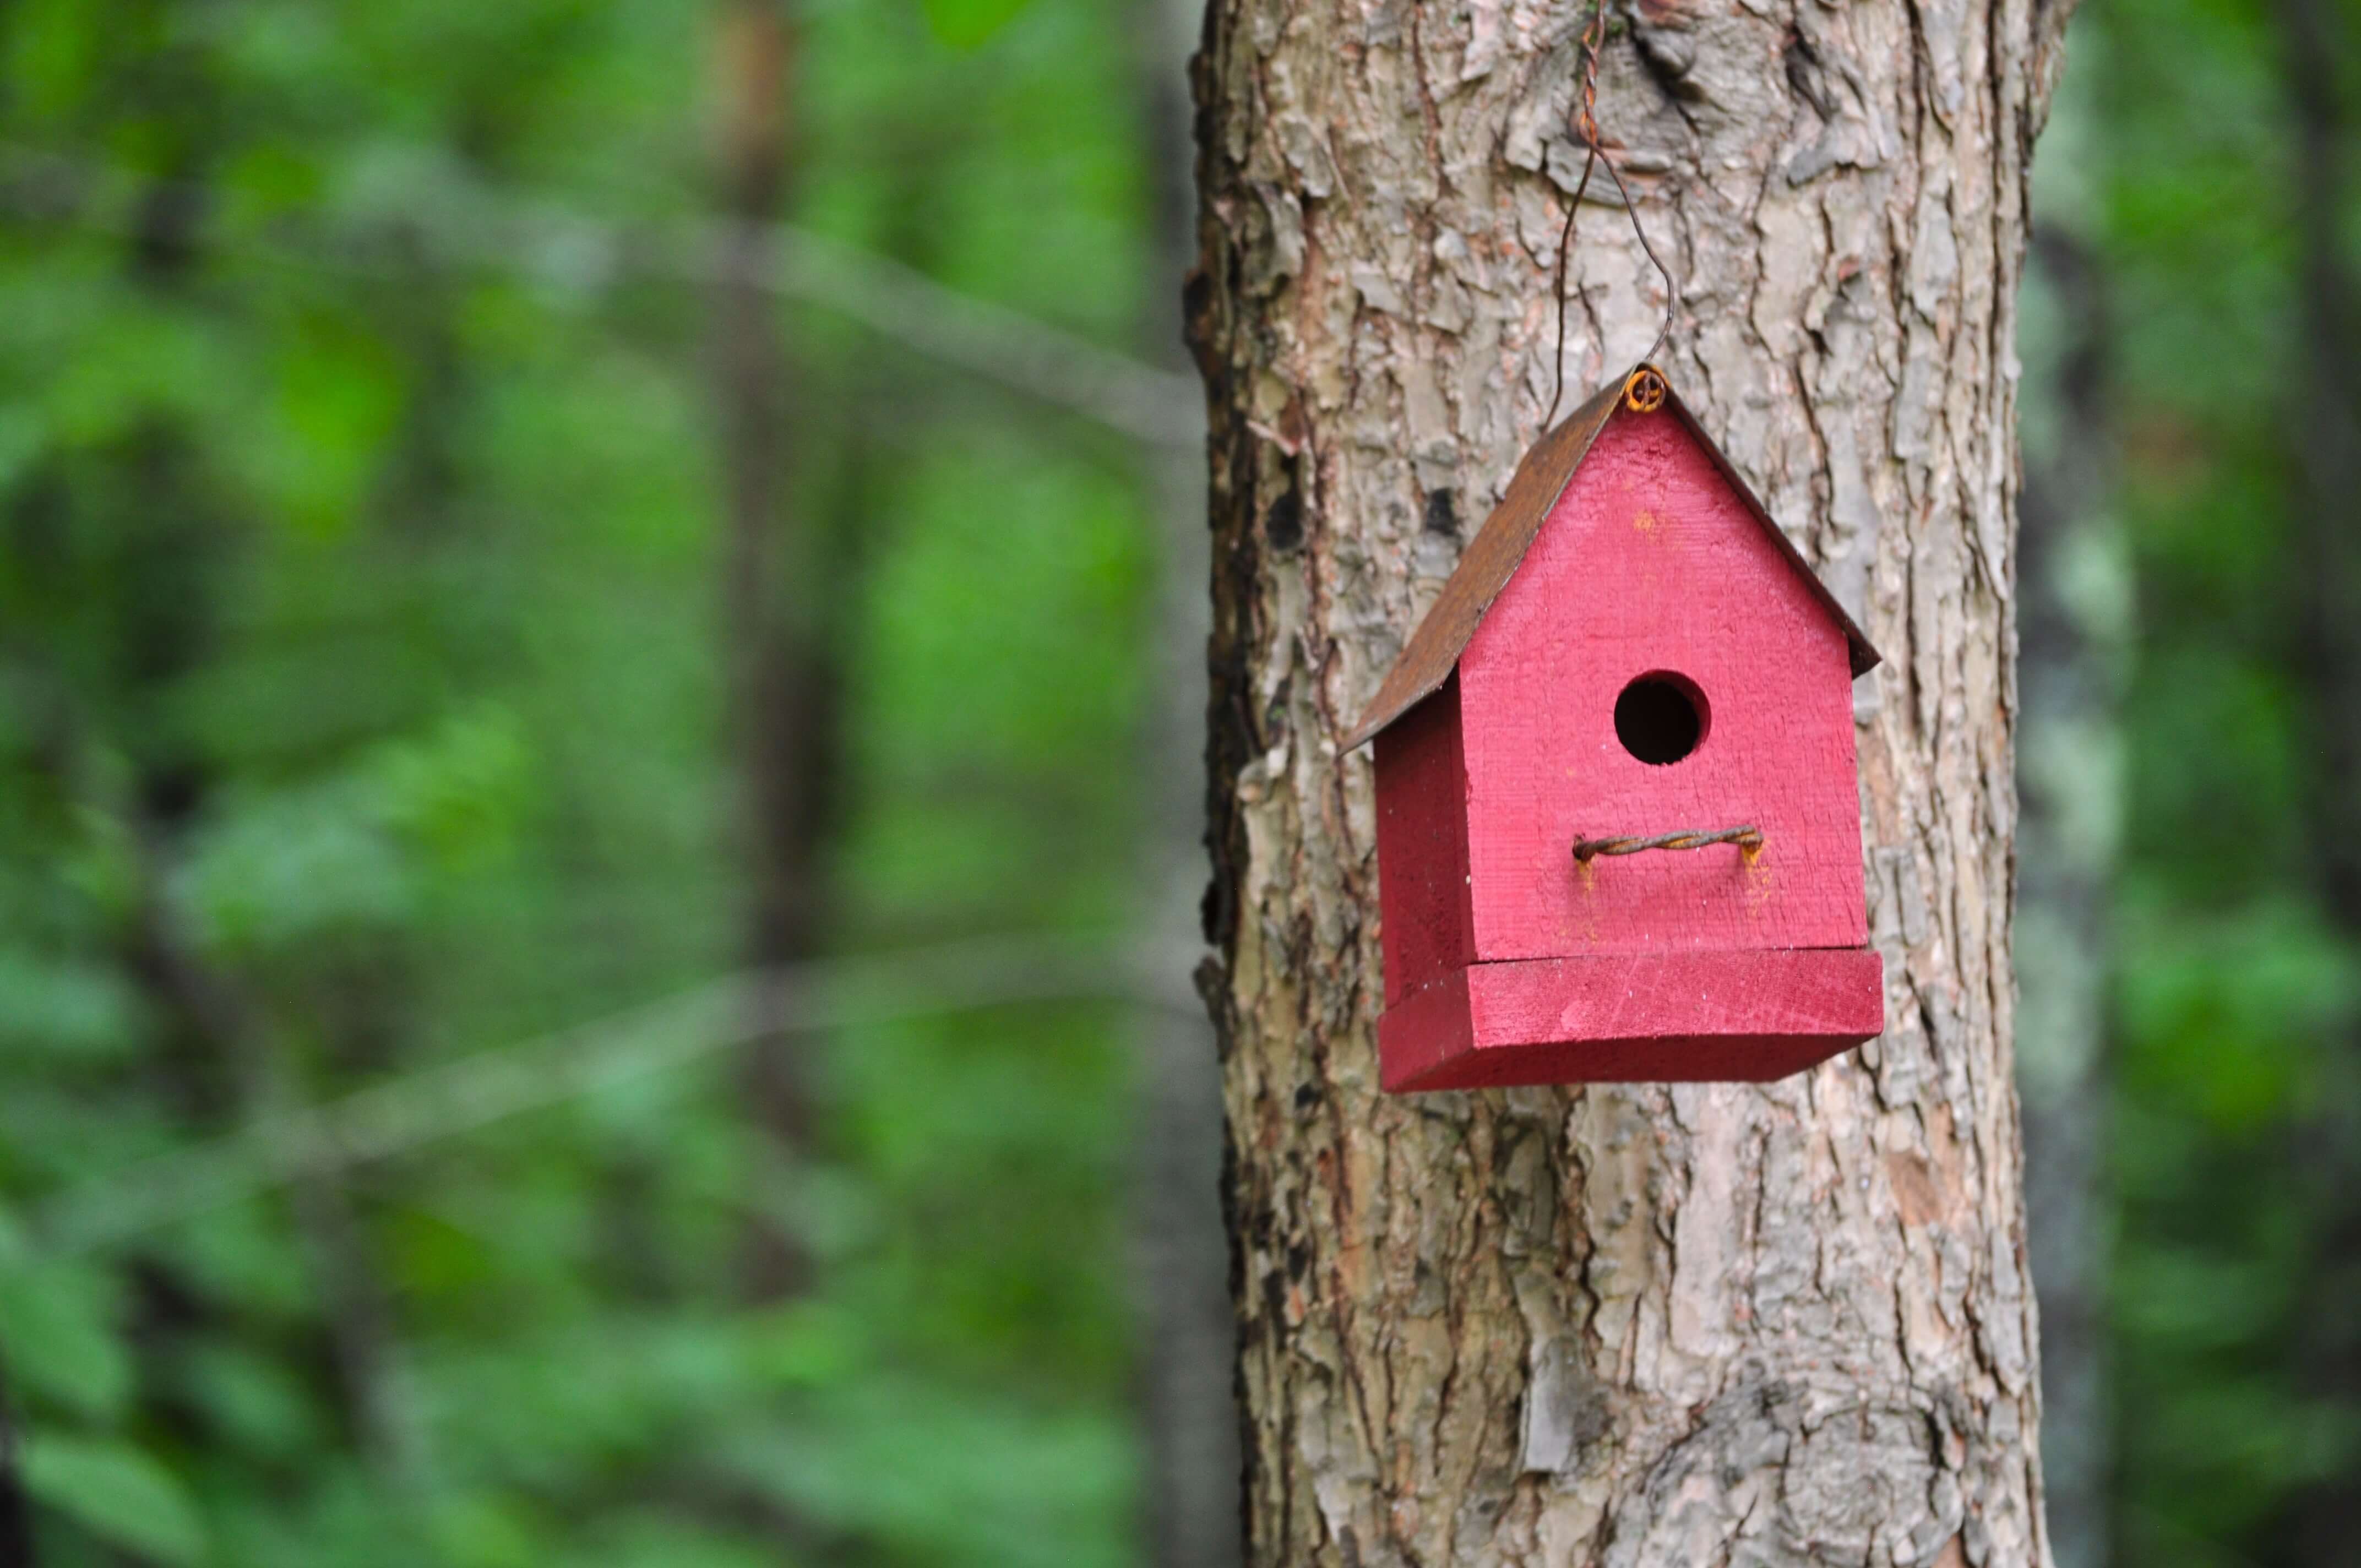 A small red bird house on a tree trunk